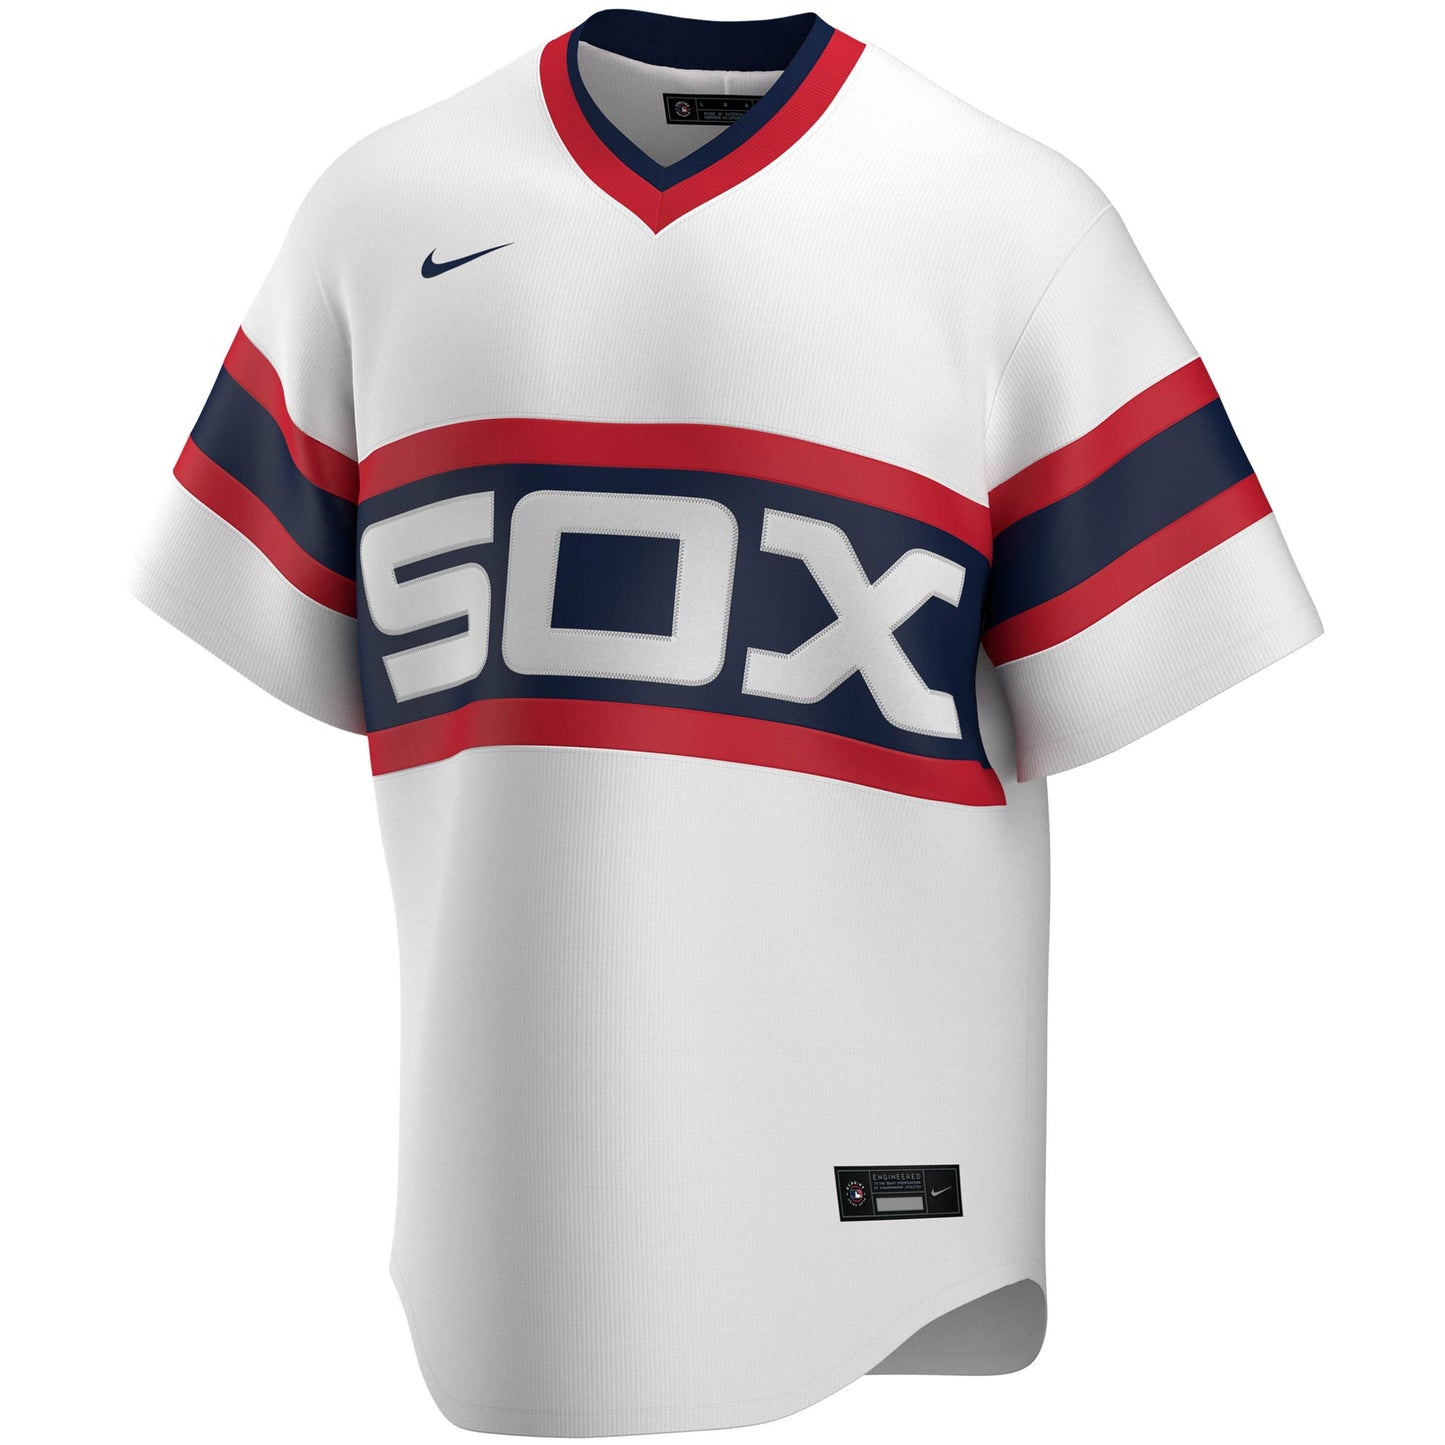 Eloy Jimenez Chicago White Sox Nike Home White Cooperstown Replica Jersey